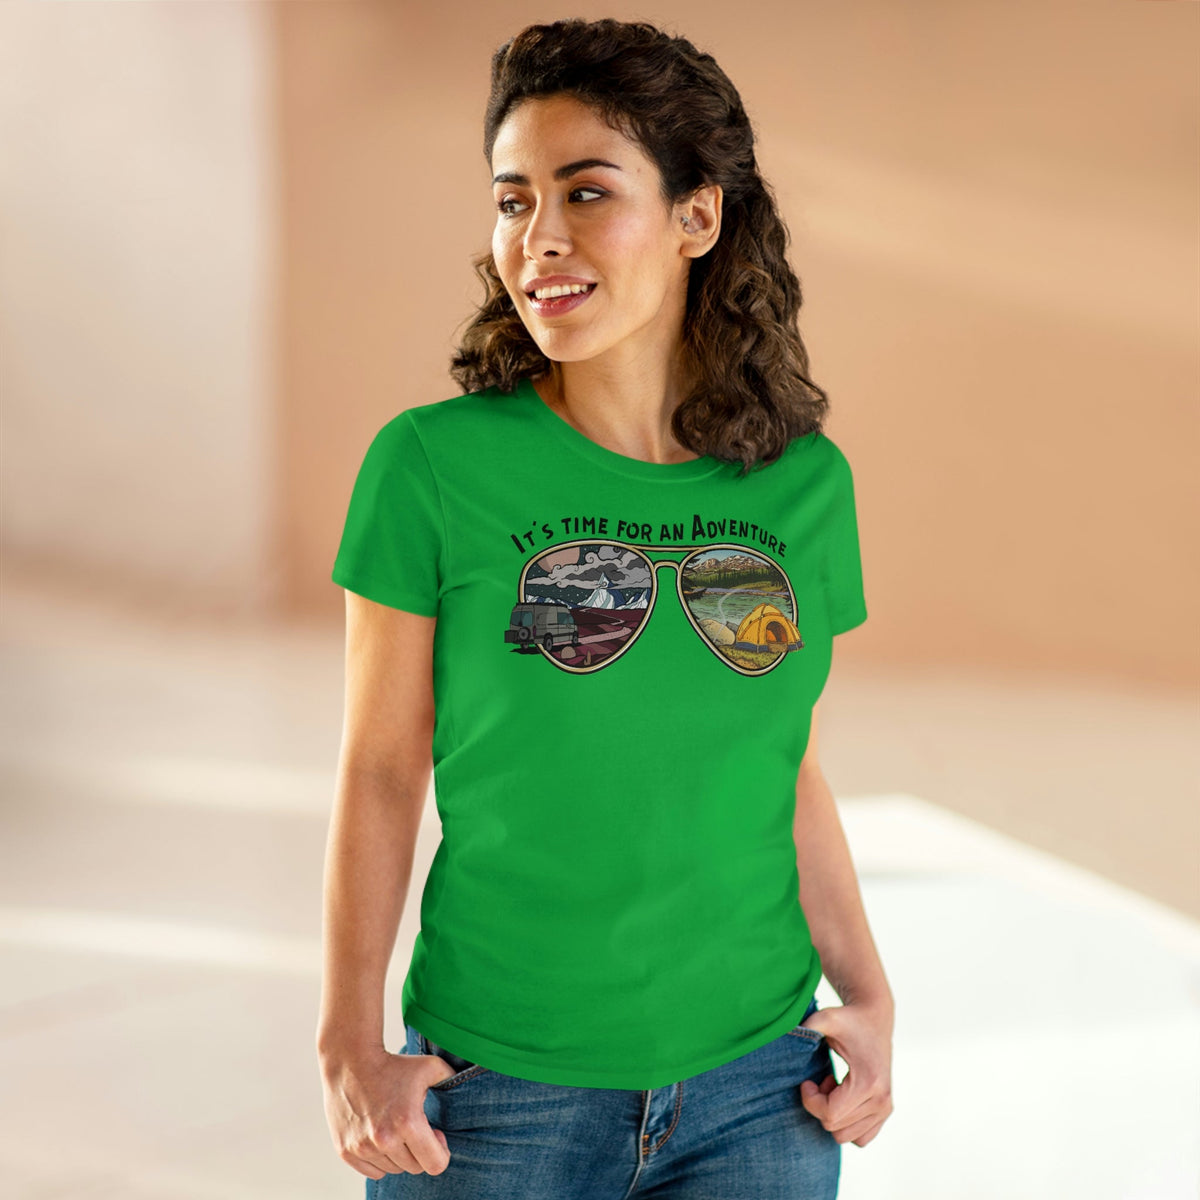 It's Time For An Adventure Women's Midweight Cotton Tee - Salty Medic Clothing Co.